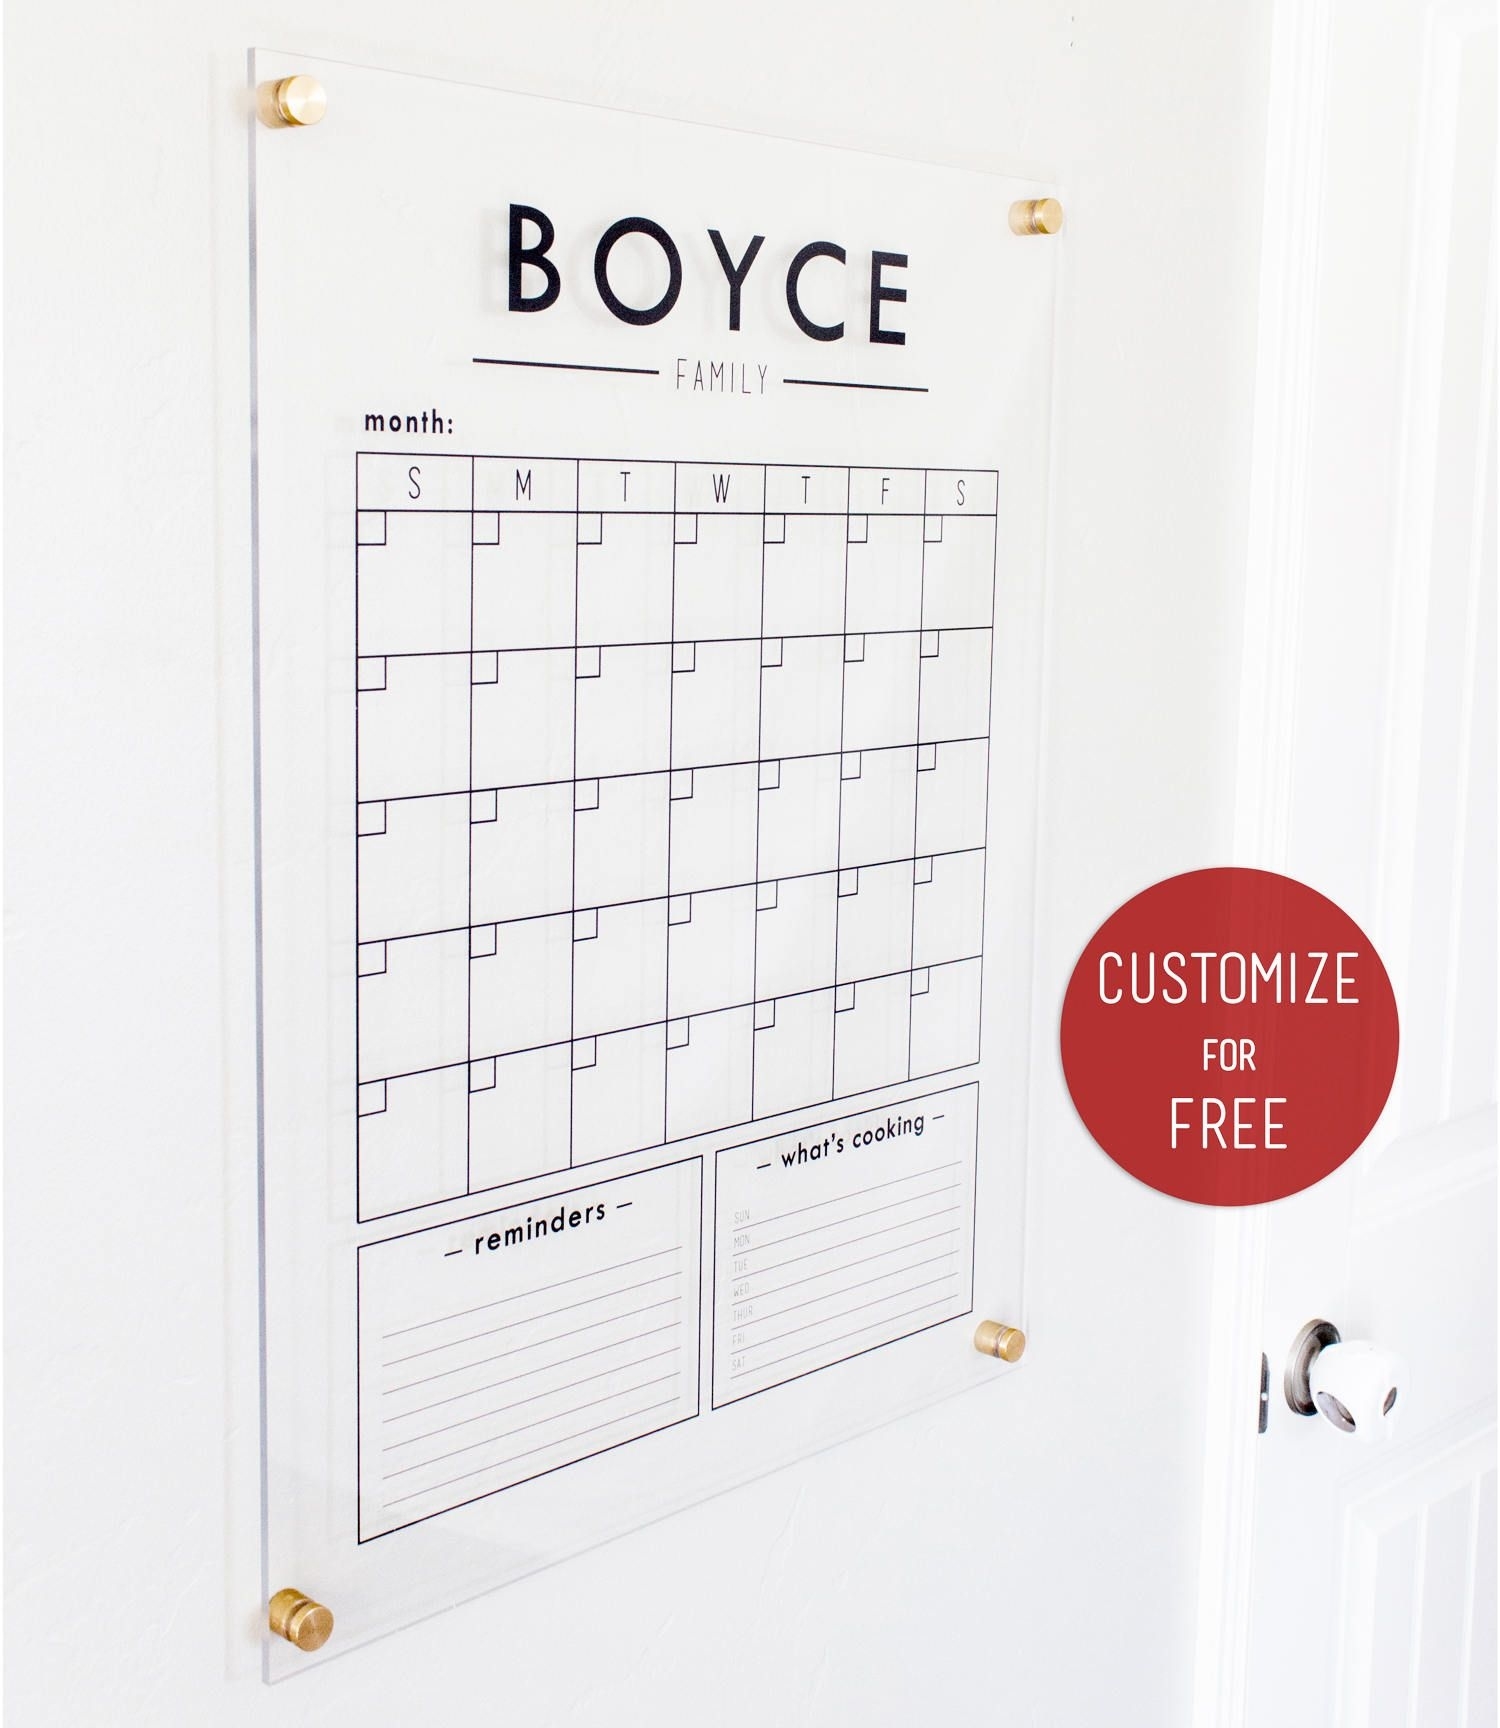 Personalized Acrylic Calendar, 2020 Calendar, New Year Exceptional Personalised Monthly Calendar Dry Erase Board